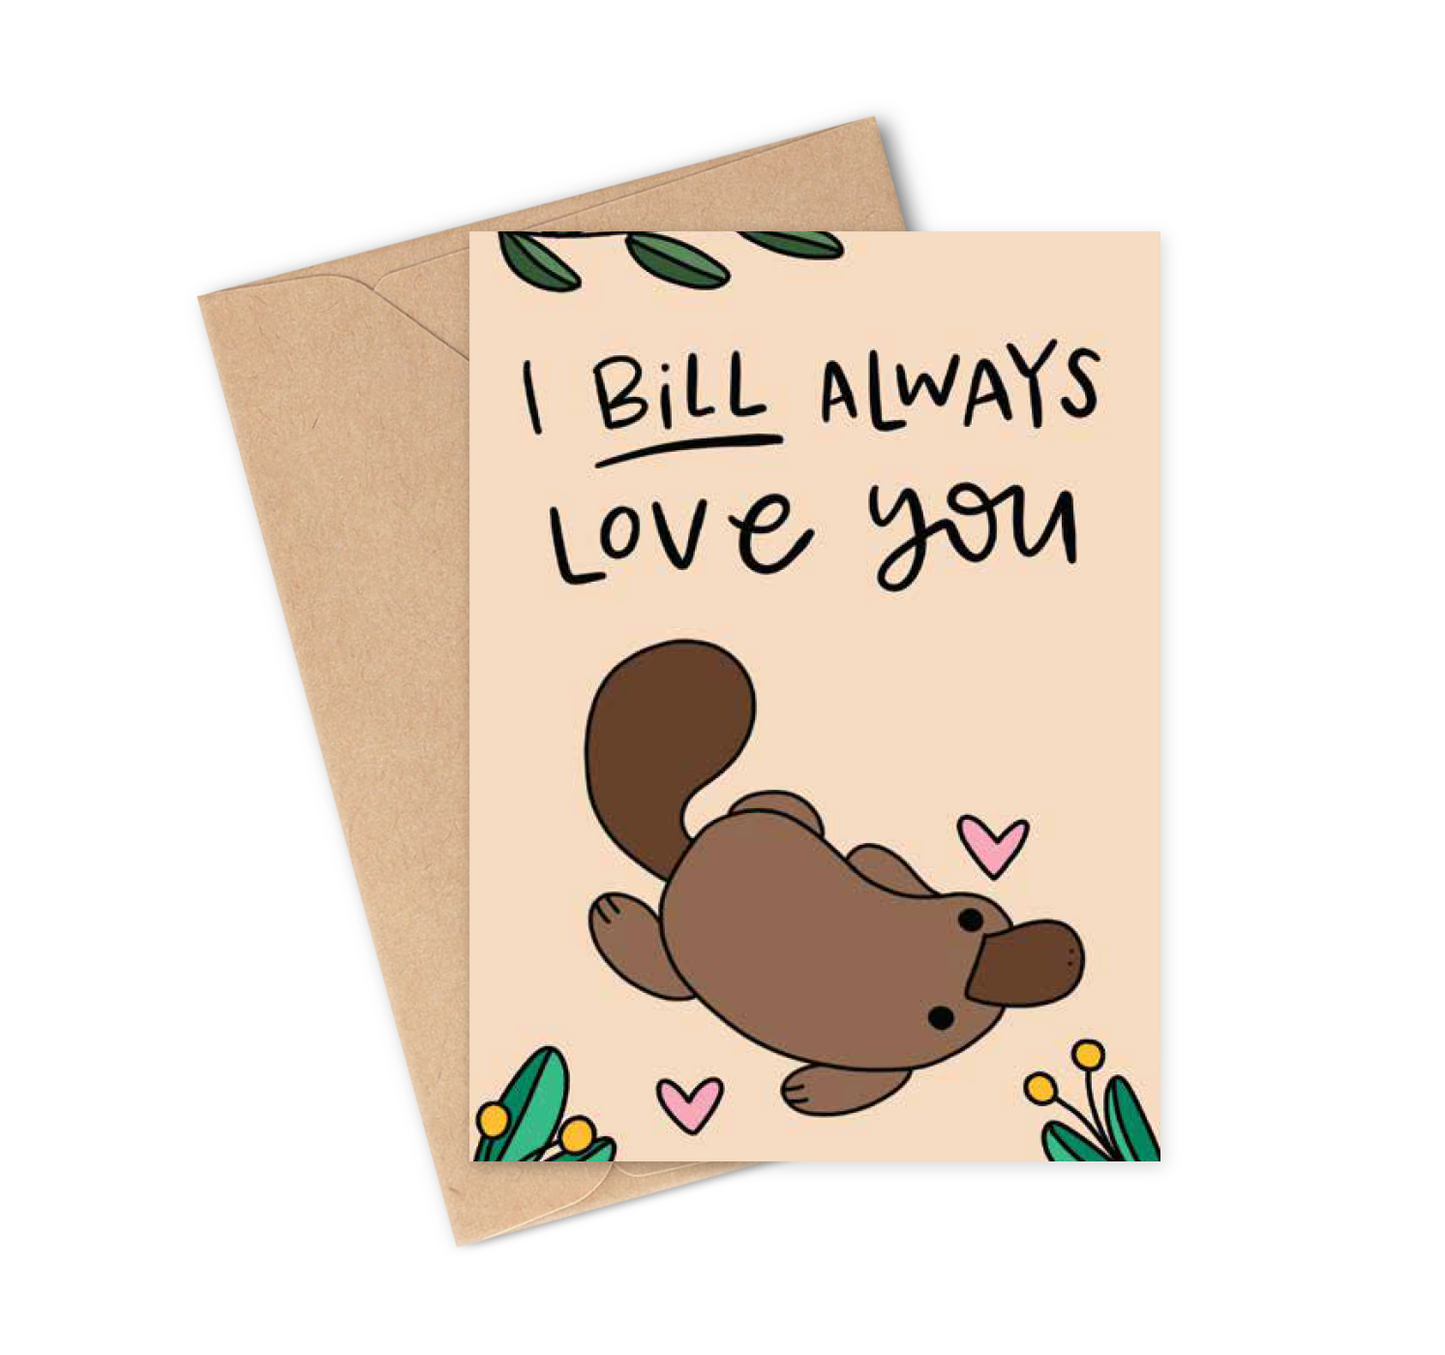 I Bill Always Love You Platypus Greeting Card with envelope